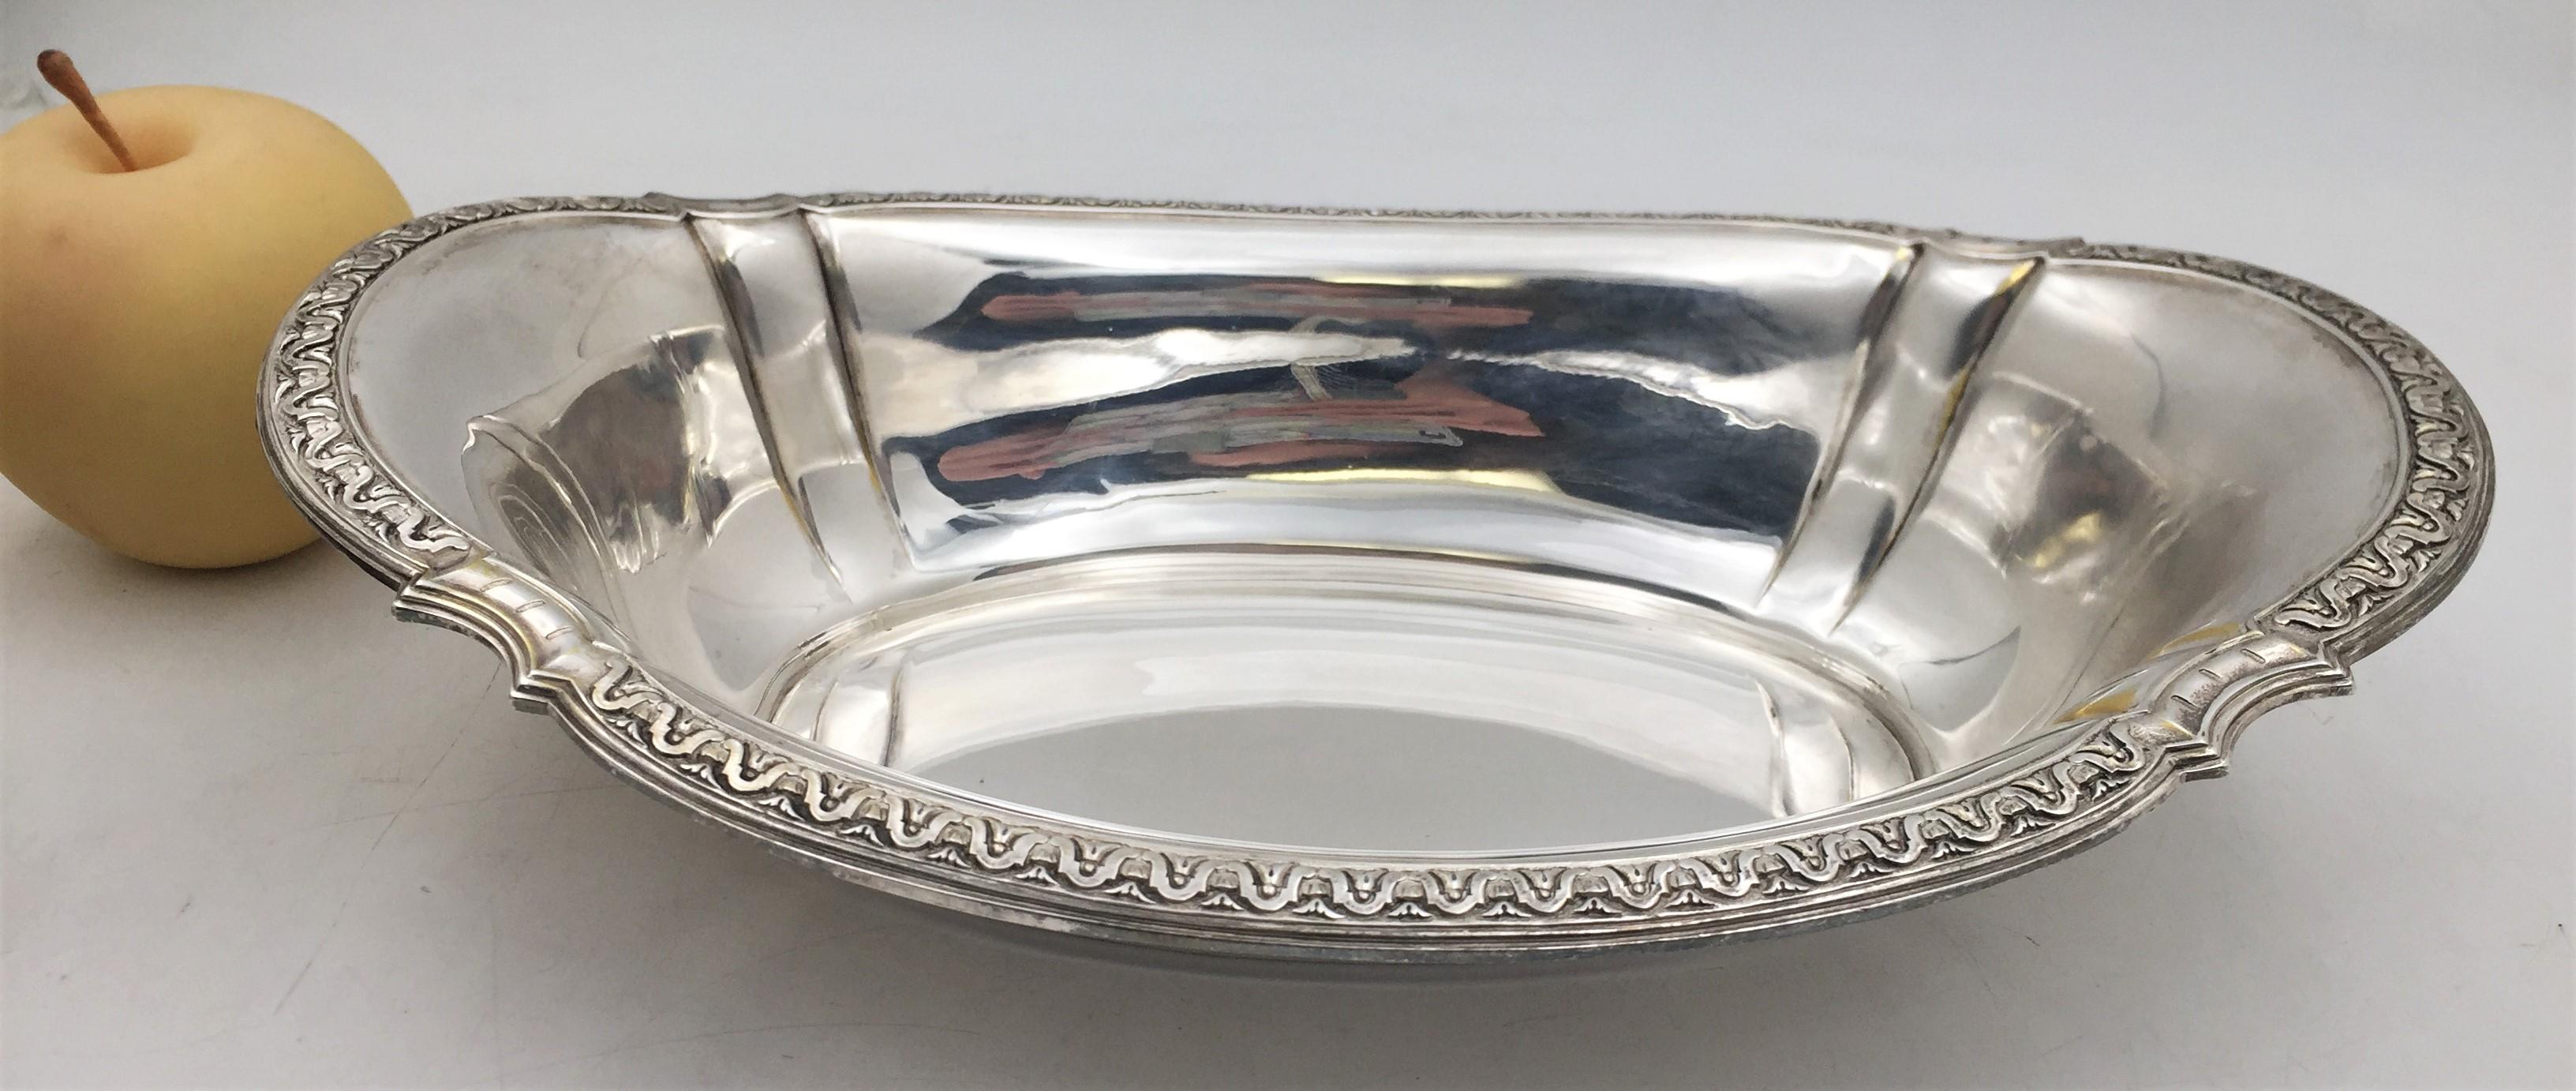 Keller, French 0.950 (higher purity than sterling) silver oval-shaped centerpiece bowl with a frieze-like geometric design along the rim from the 20th century. This elegant piece measures 13 1/4'' in length by 8 3/8'' in width by 3 1/2'' in height,